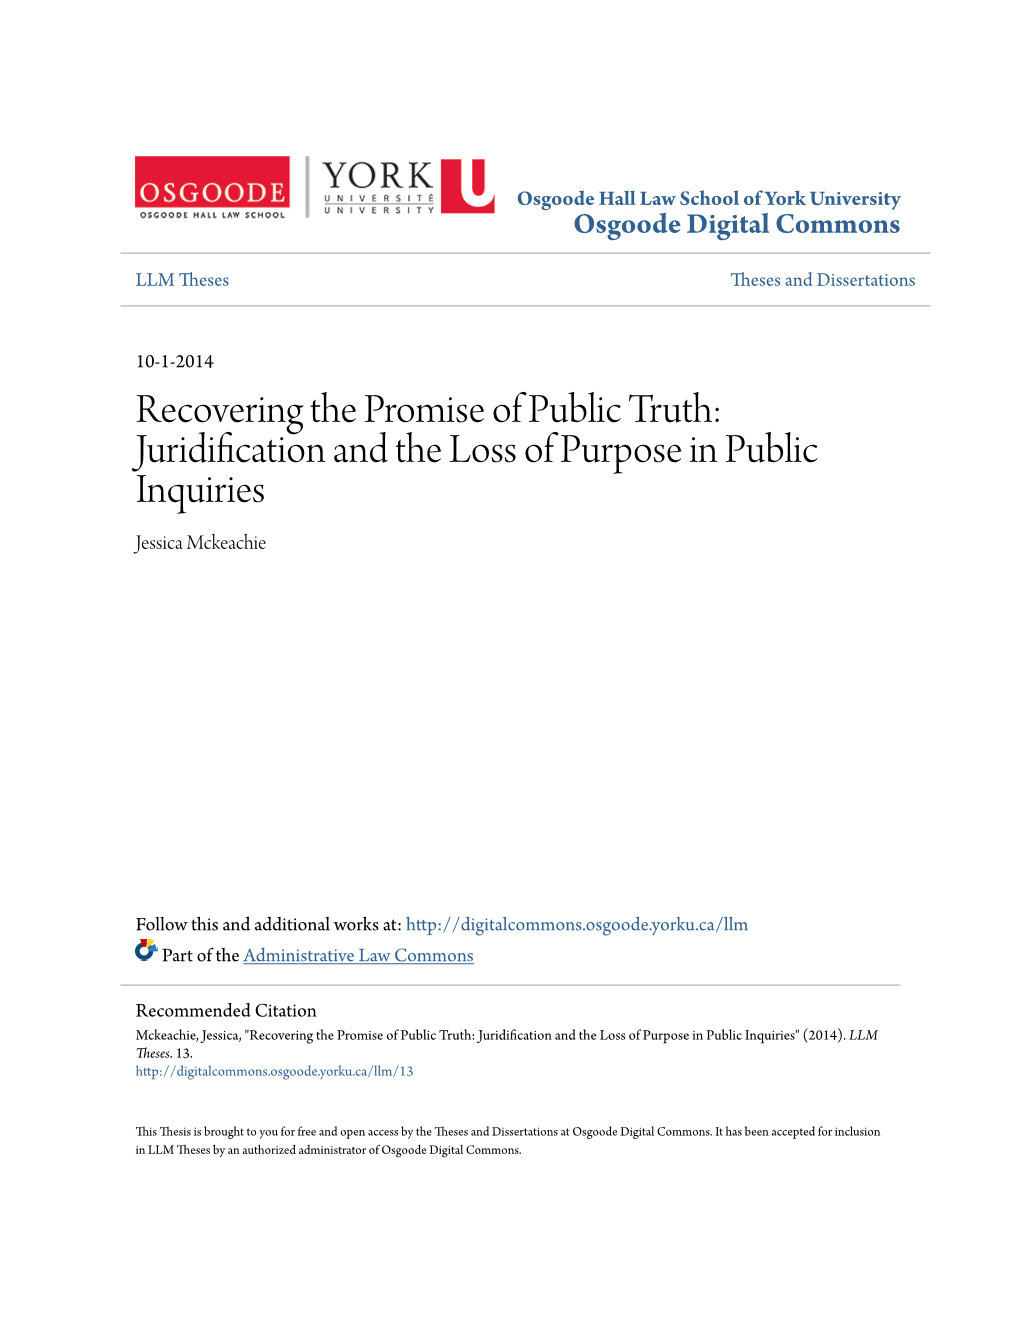 Recovering the Promise of Public Truth: Juridification and the Loss of Purpose in Public Inquiries Jessica Mckeachie